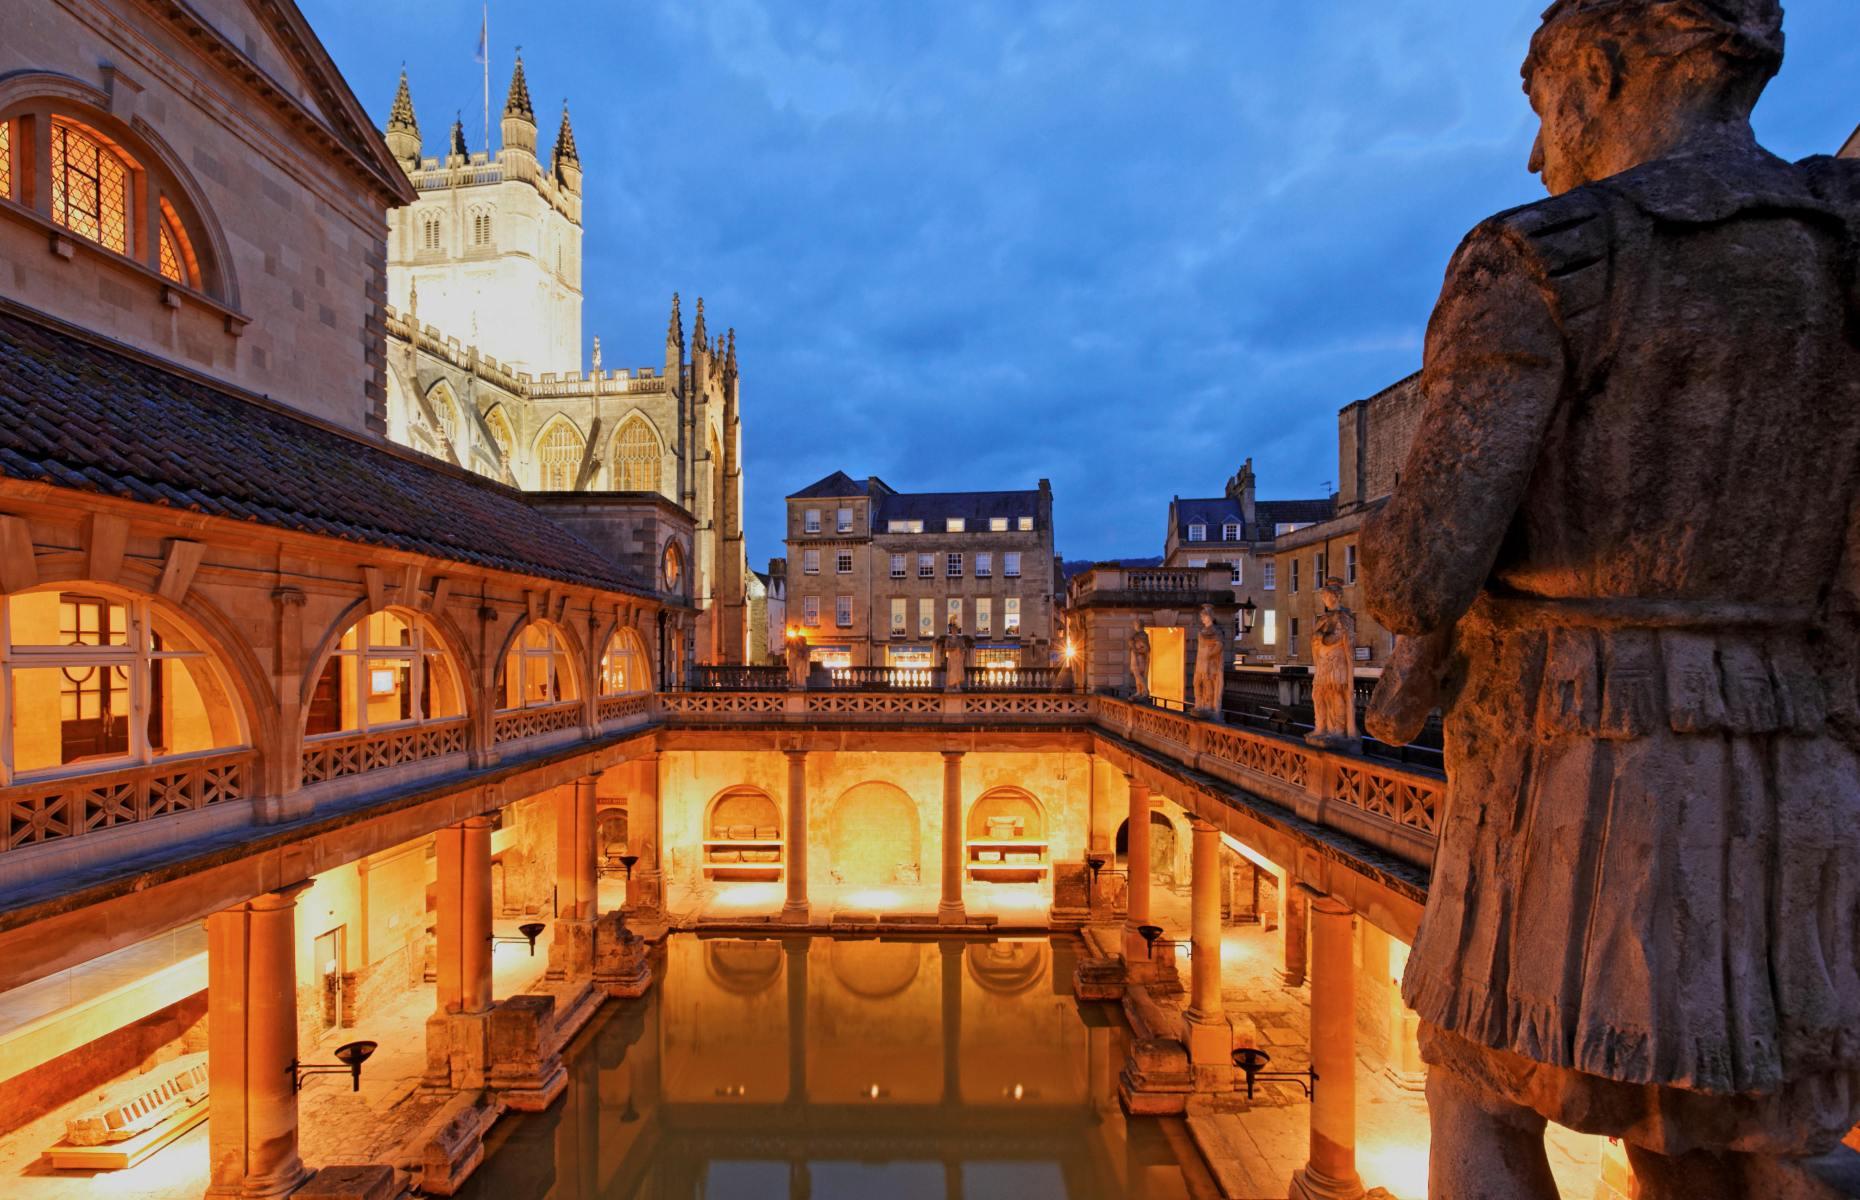 <p>This well-preserved ancient bathing complex is the sparkling jewel of the historic city of <a href="https://www.loveexploring.com/guides/79642/explore-bath-the-top-things-to-do-where-to-stay-what-to-eat">Bath</a>. Dating back to the 1st century AD, the baths were built around natural hot springs within a Roman settlement known as Aquae Sulis, along with a temple dedicated to the goddess of the springs Sulis Minerva. Lined with impressive columns, the ruins of the beautiful Great Bath lies in the middle of the ancient complex that is now the city’s biggest attraction and earned Bath its World Heritage status in 1987.</p>  <p><strong><a href="https://www.loveexploring.com/galleries/71852/30-of-britains-most-historic-towns-and-cities?page=1">Check out more of Britain’s most historic towns and cities</a></strong></p>